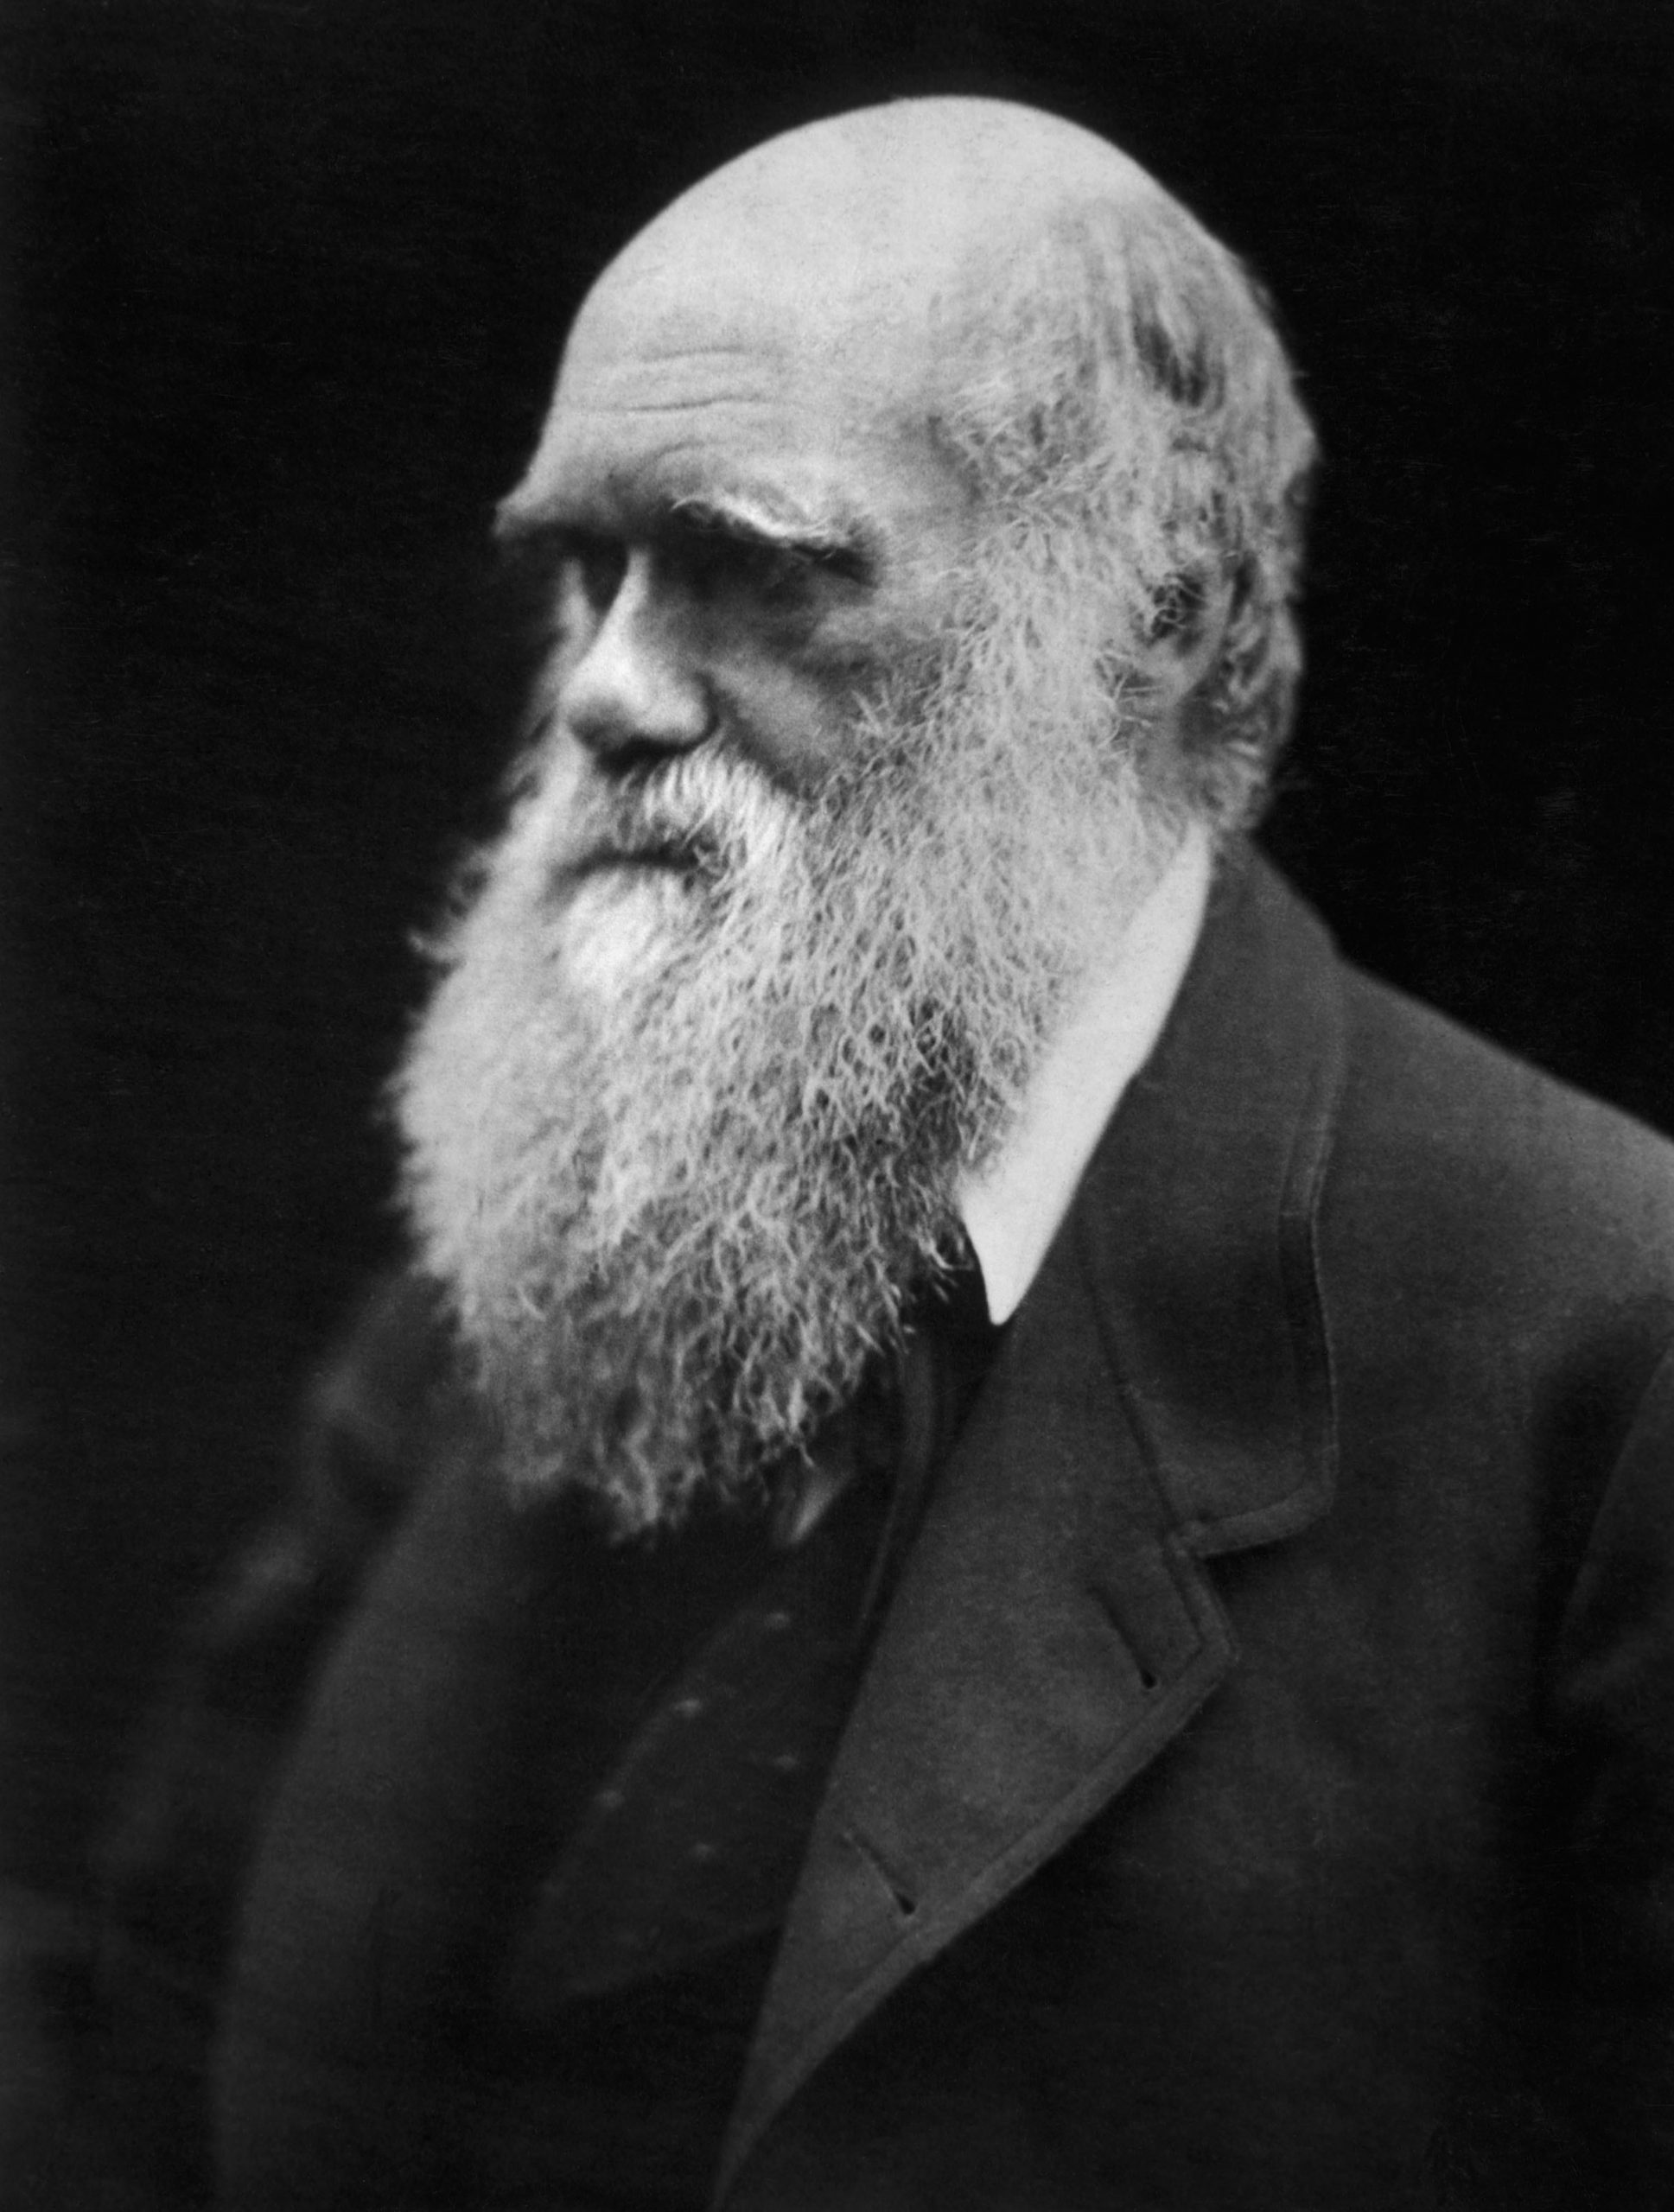 A black and white photograph of Charles Darwin in three-quarter view. He is wearing a suit and is photographed from the check up.